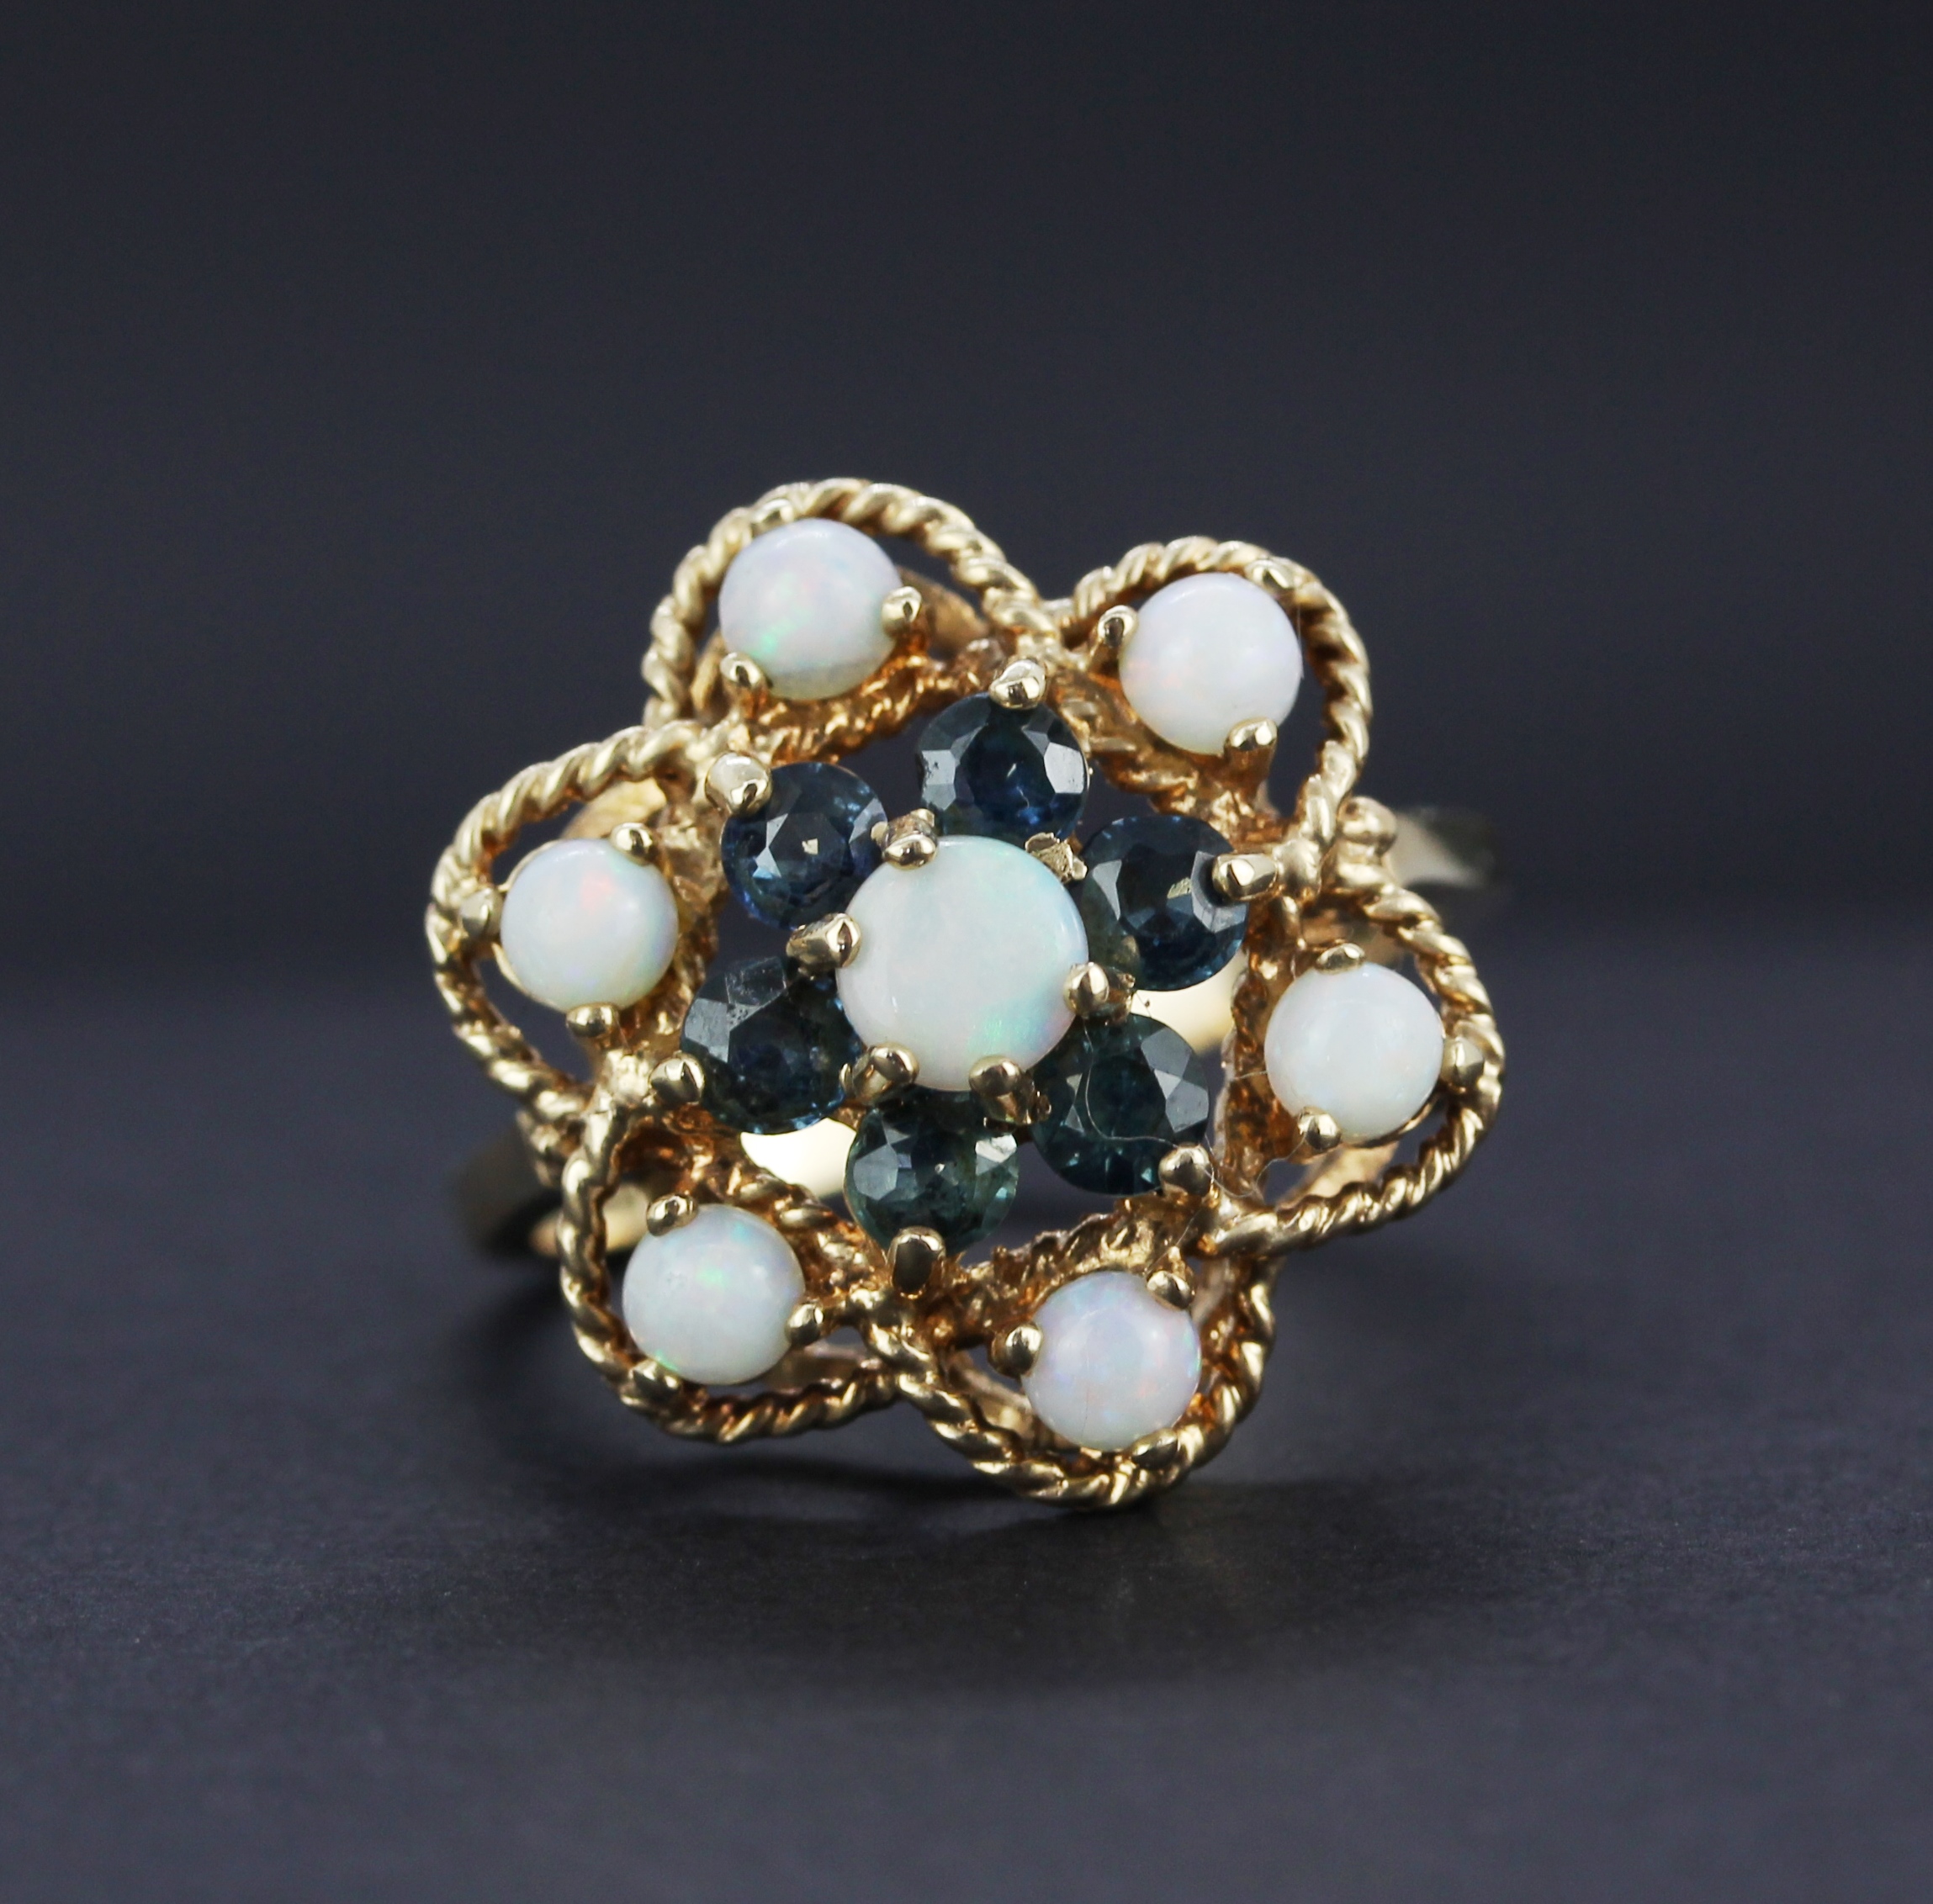 A large hallmarked (worn hallmark) 9ct yellow gold ring set with round cabochon cut opals and - Image 2 of 4